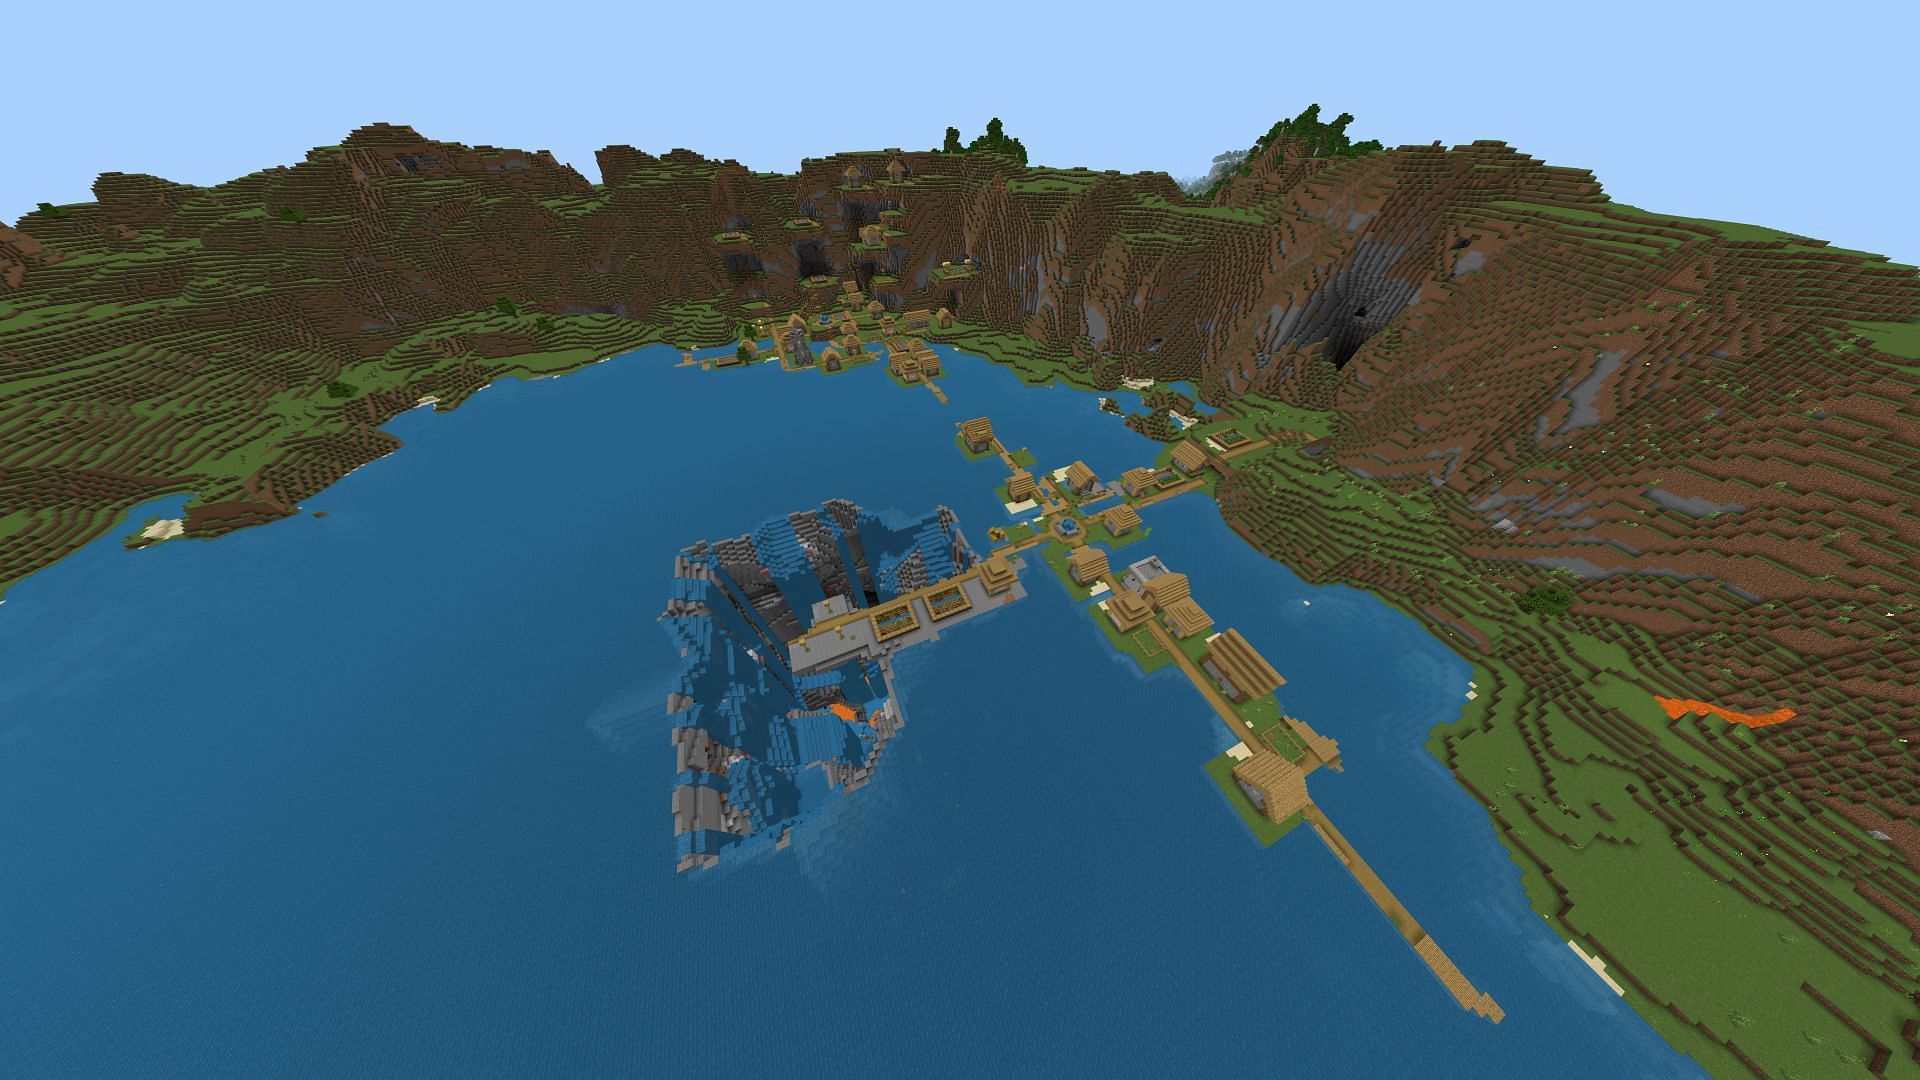 This seed continues the trend of strange sinkhole seeds in the 1.20 update (Image via Mojang)